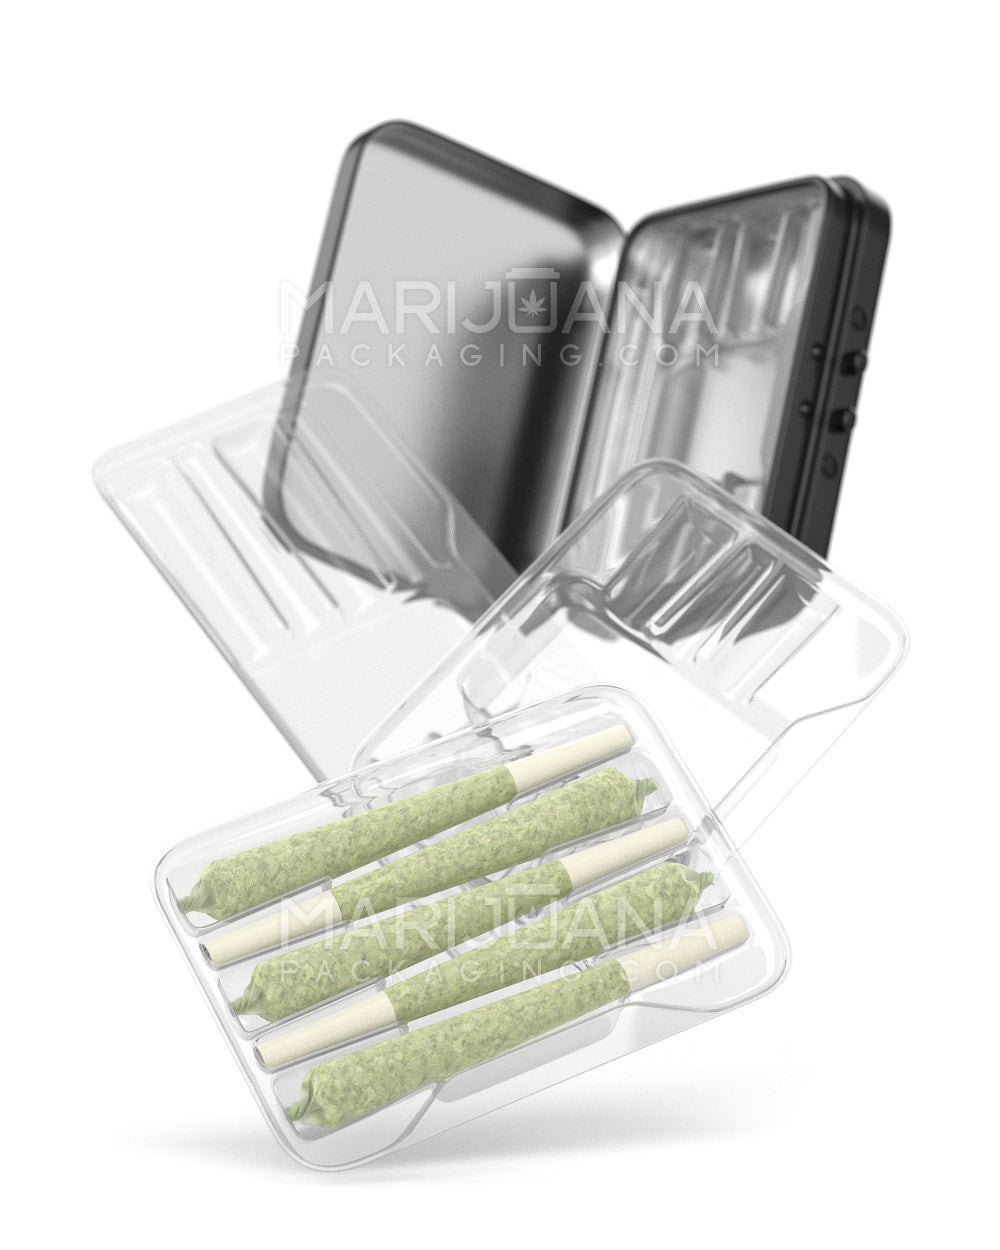 8 LEAF Pre-Rolled Cones with a 4 Part Metal Weed Grinder and wooden tray